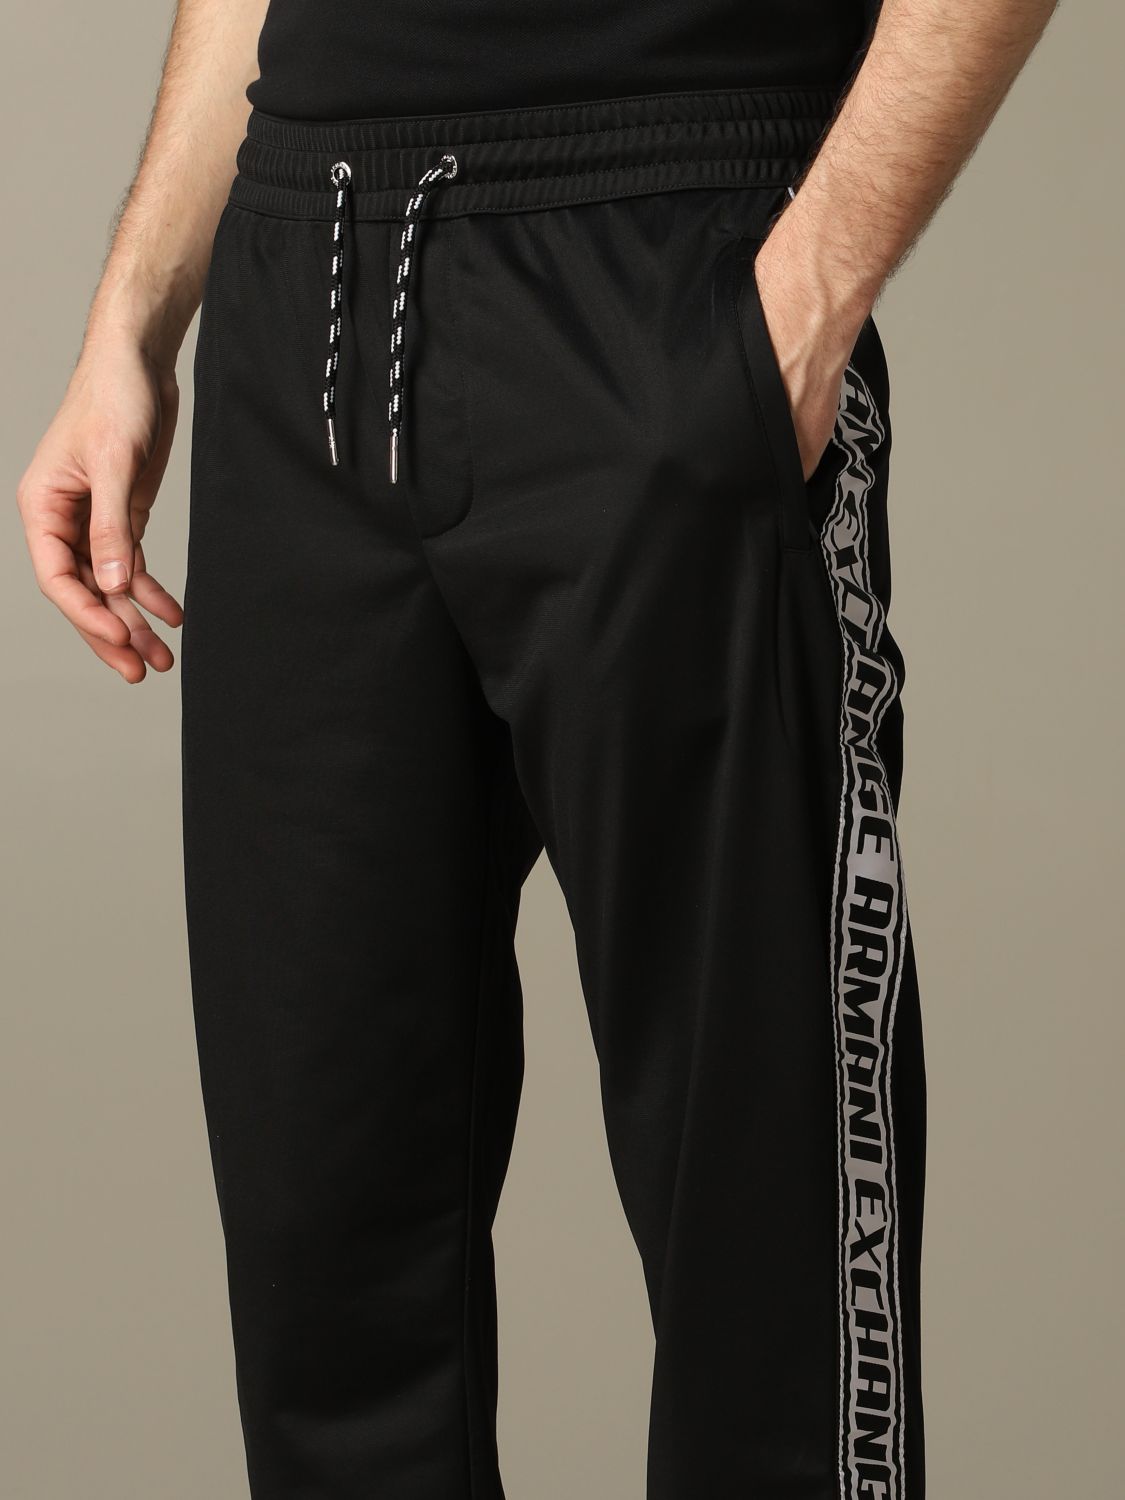 Armani Exchange Outlet: jogging trousers in acetate with logoed bands -  Black | Armani Exchange pants 3HZPFM Z8M8Z online on 